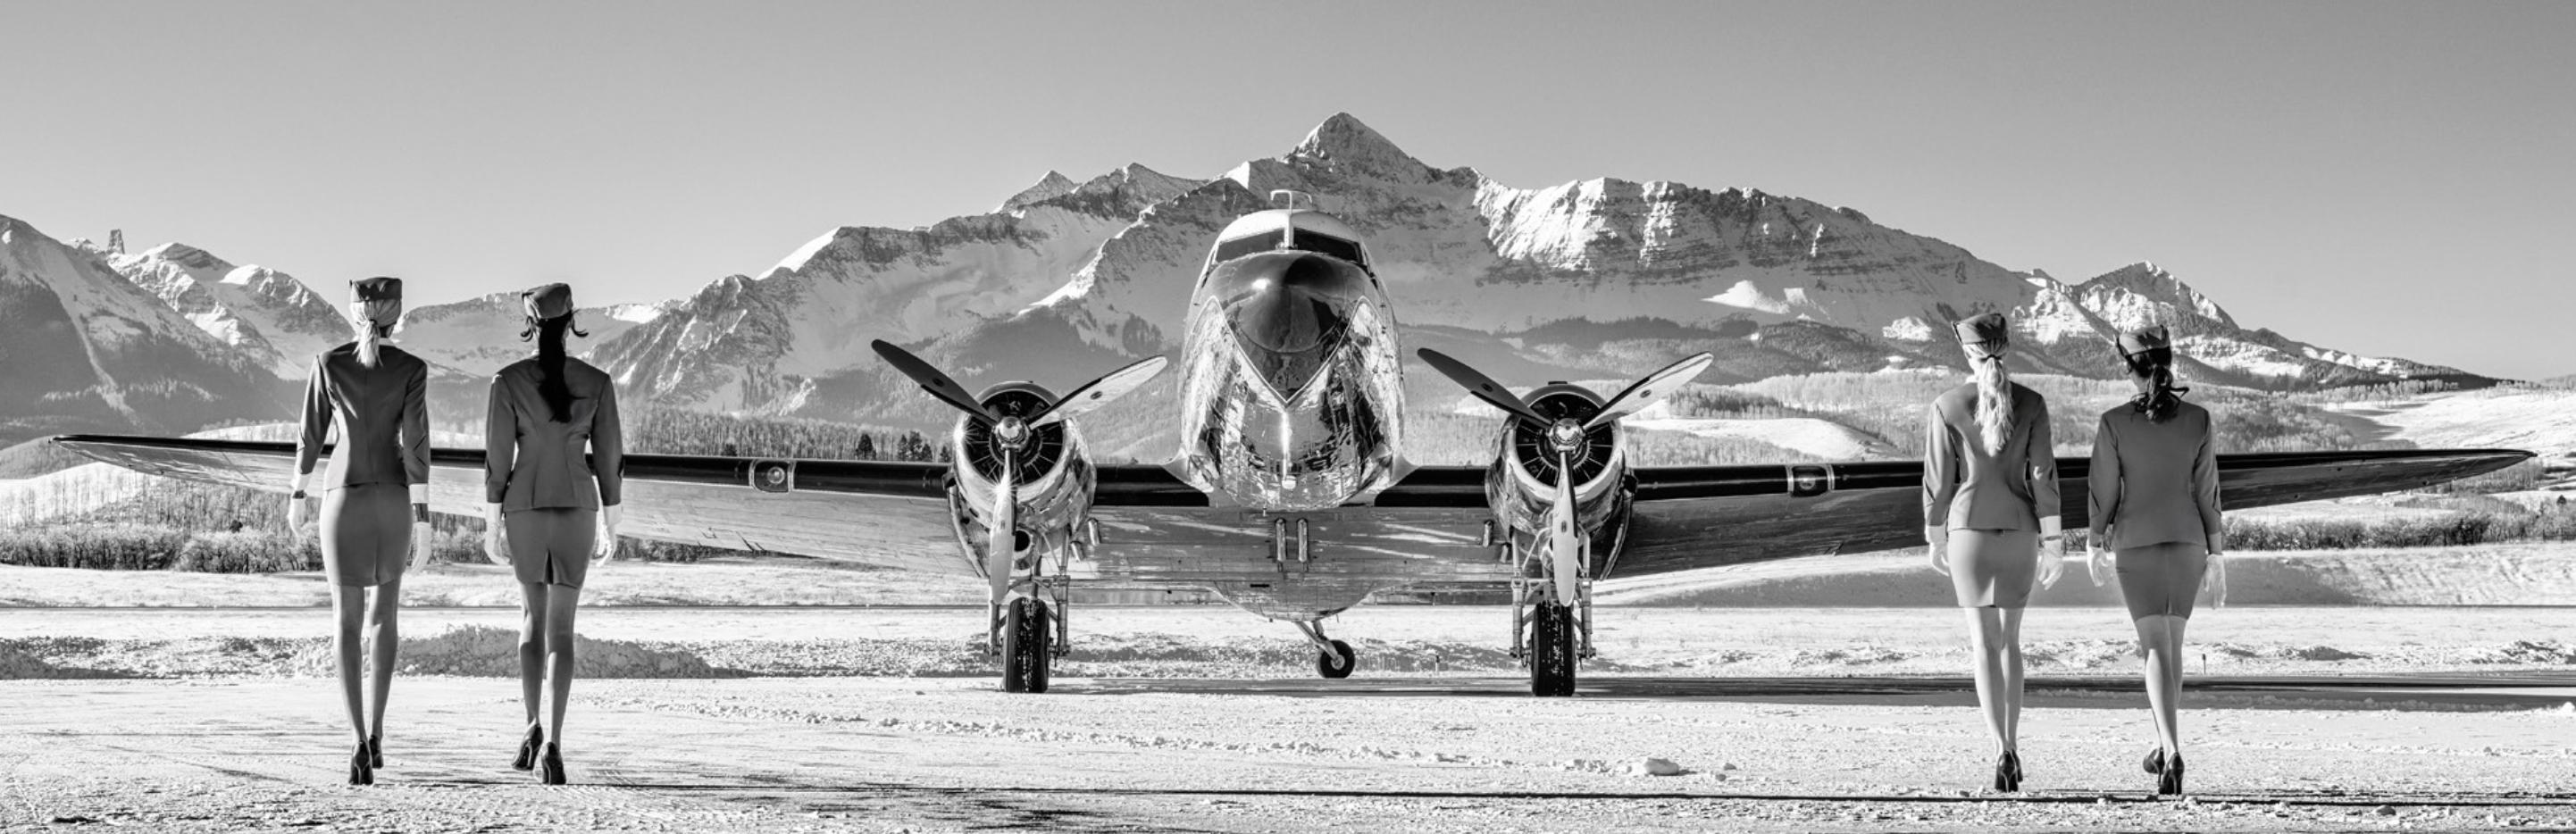 David Yarrow Black and White Photograph - Come Fly with Me